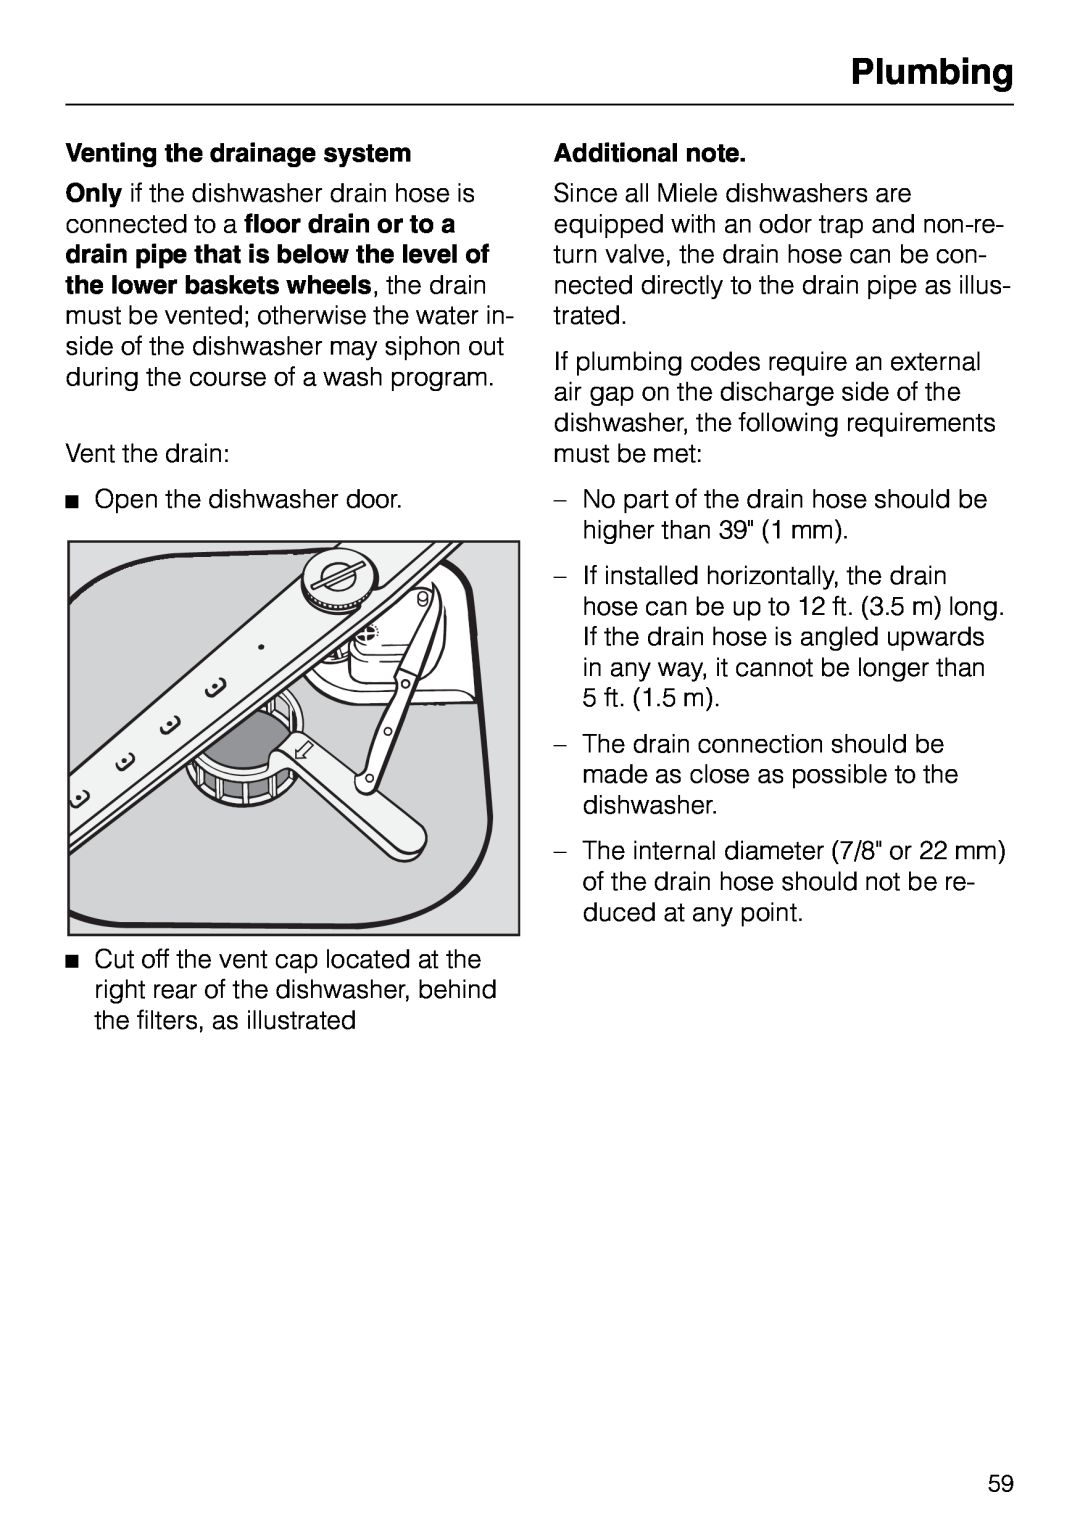 Miele M.-NR. 04 390 922 operating instructions Plumbing, Venting the drainage system, Additional note 